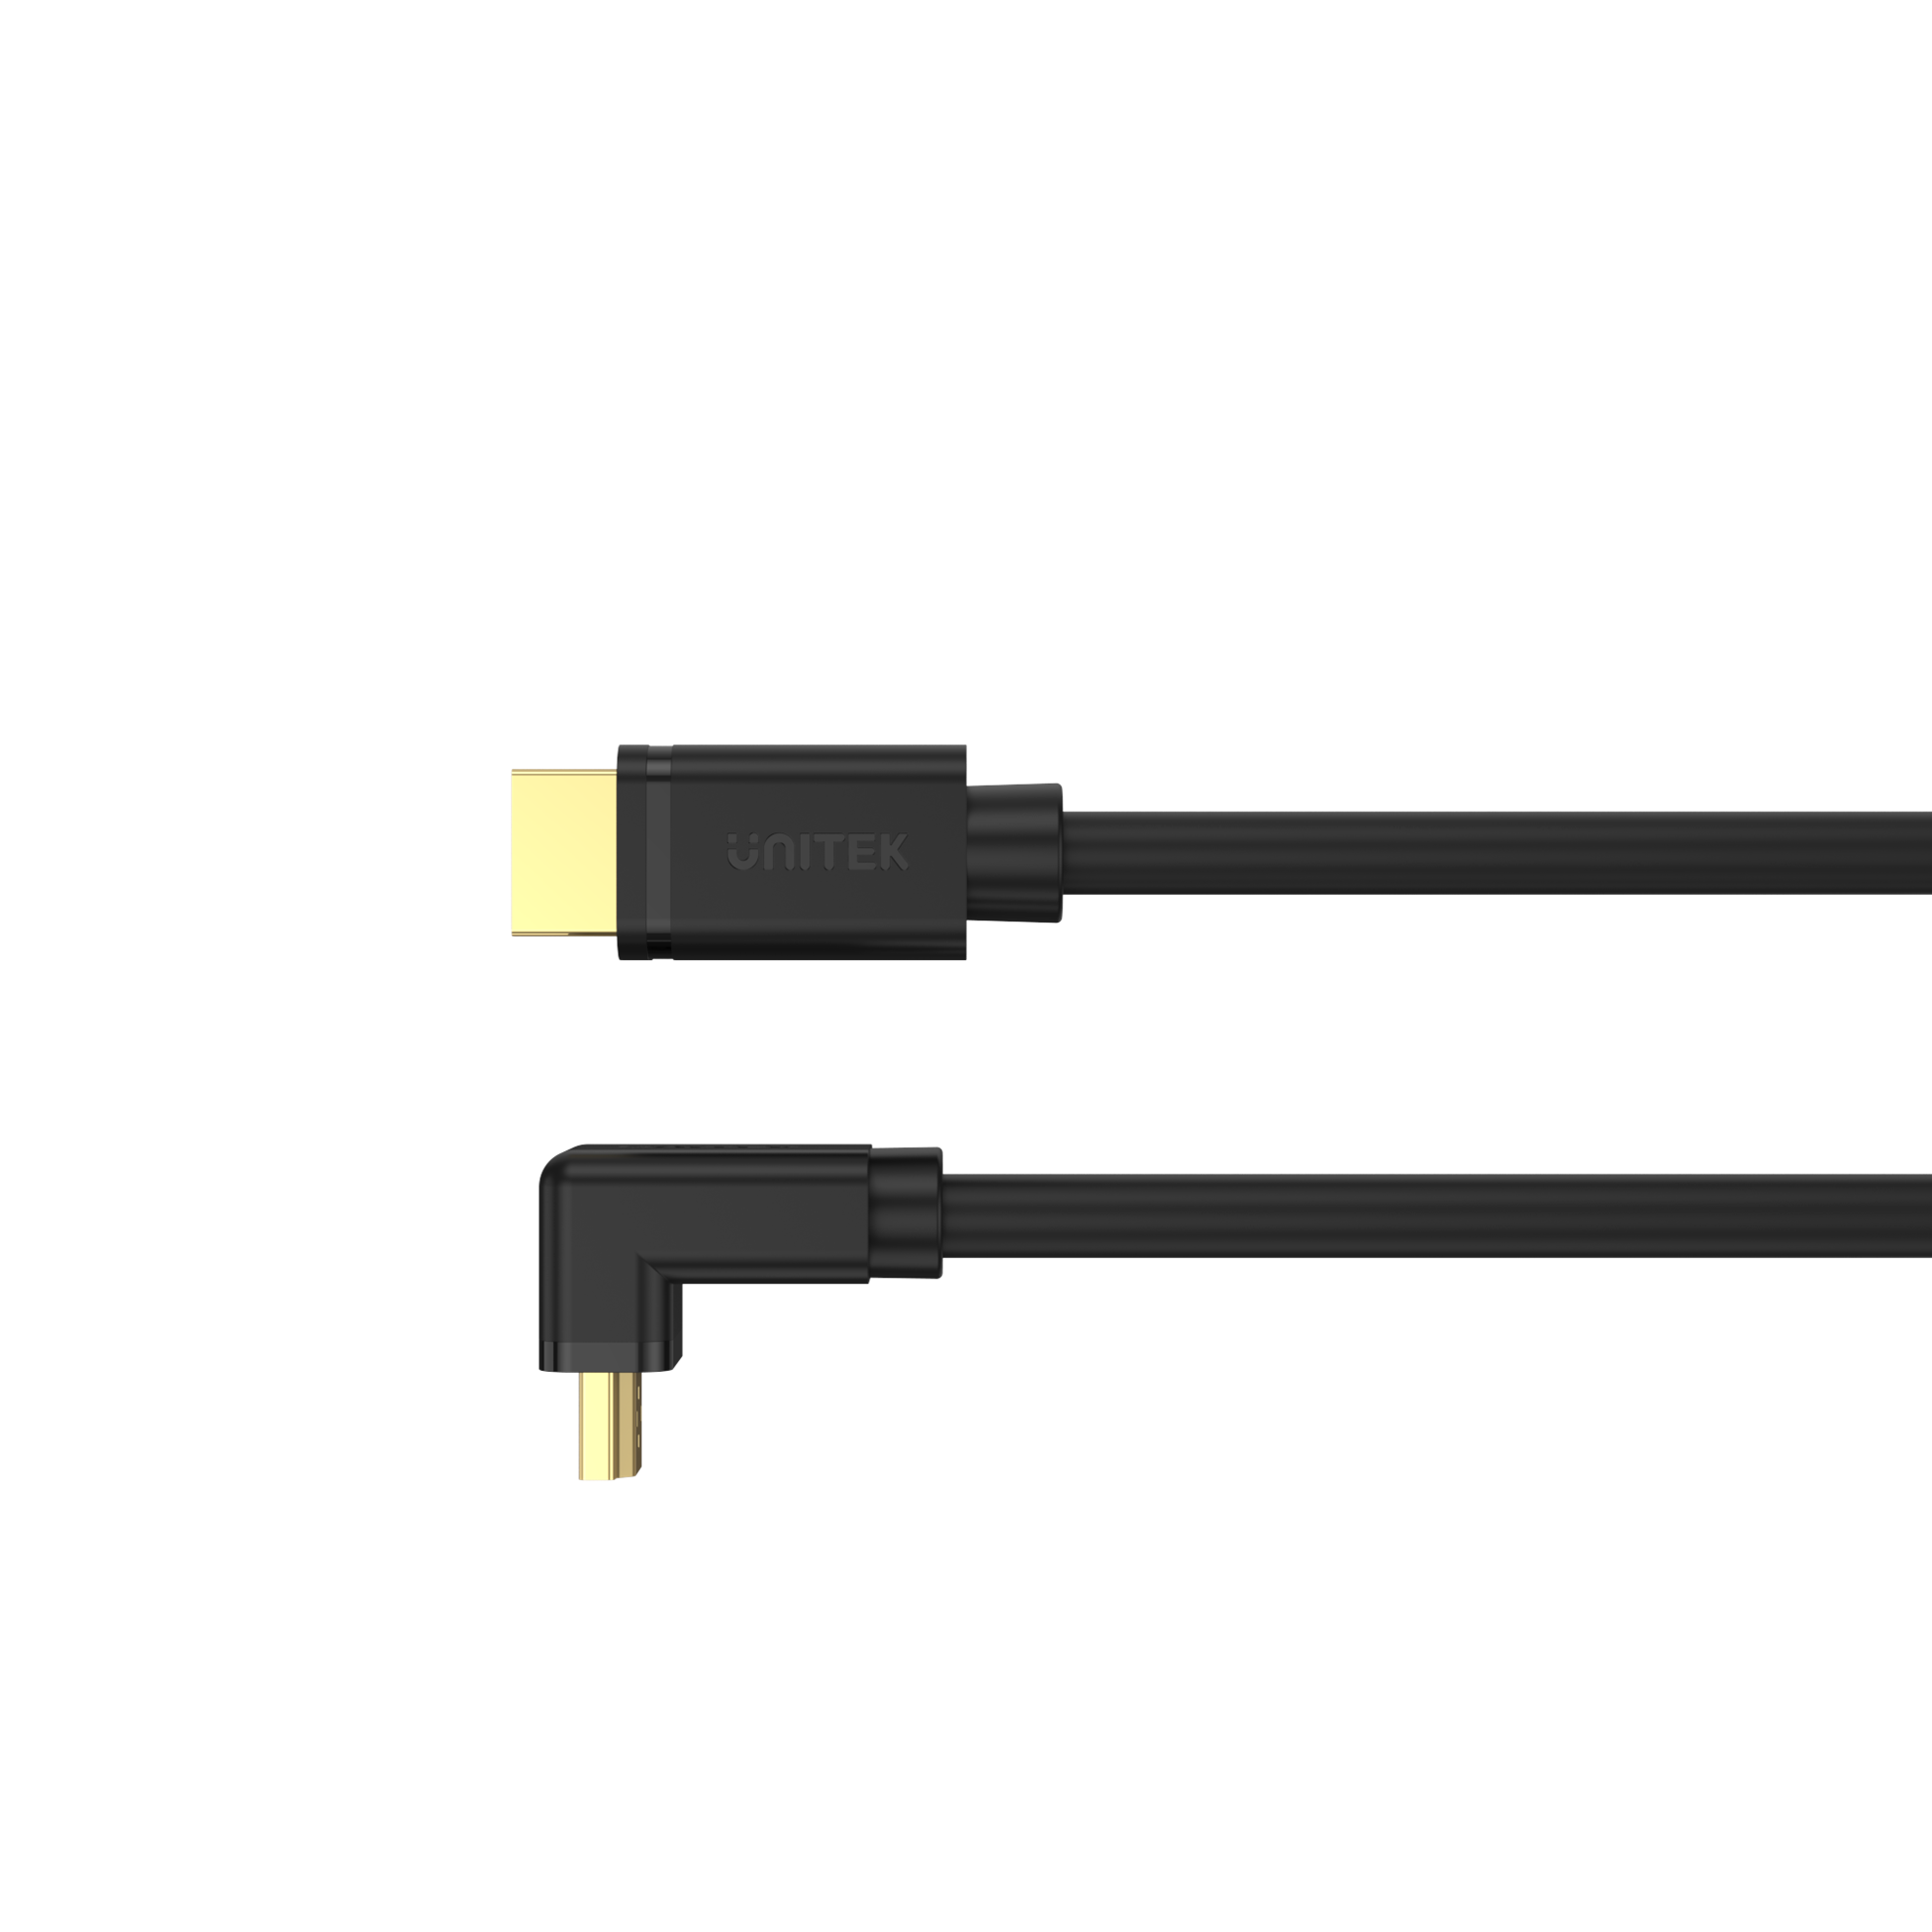 UNITEK_2M_4K_HDMI_2.0_Right_Angle_Cable_with_90_Degree_Elbow._Supports_HDR10,_HDCP2.2,_3D_&_7.1_Surround_Sound._Gold-Plated_Connectors. 2106